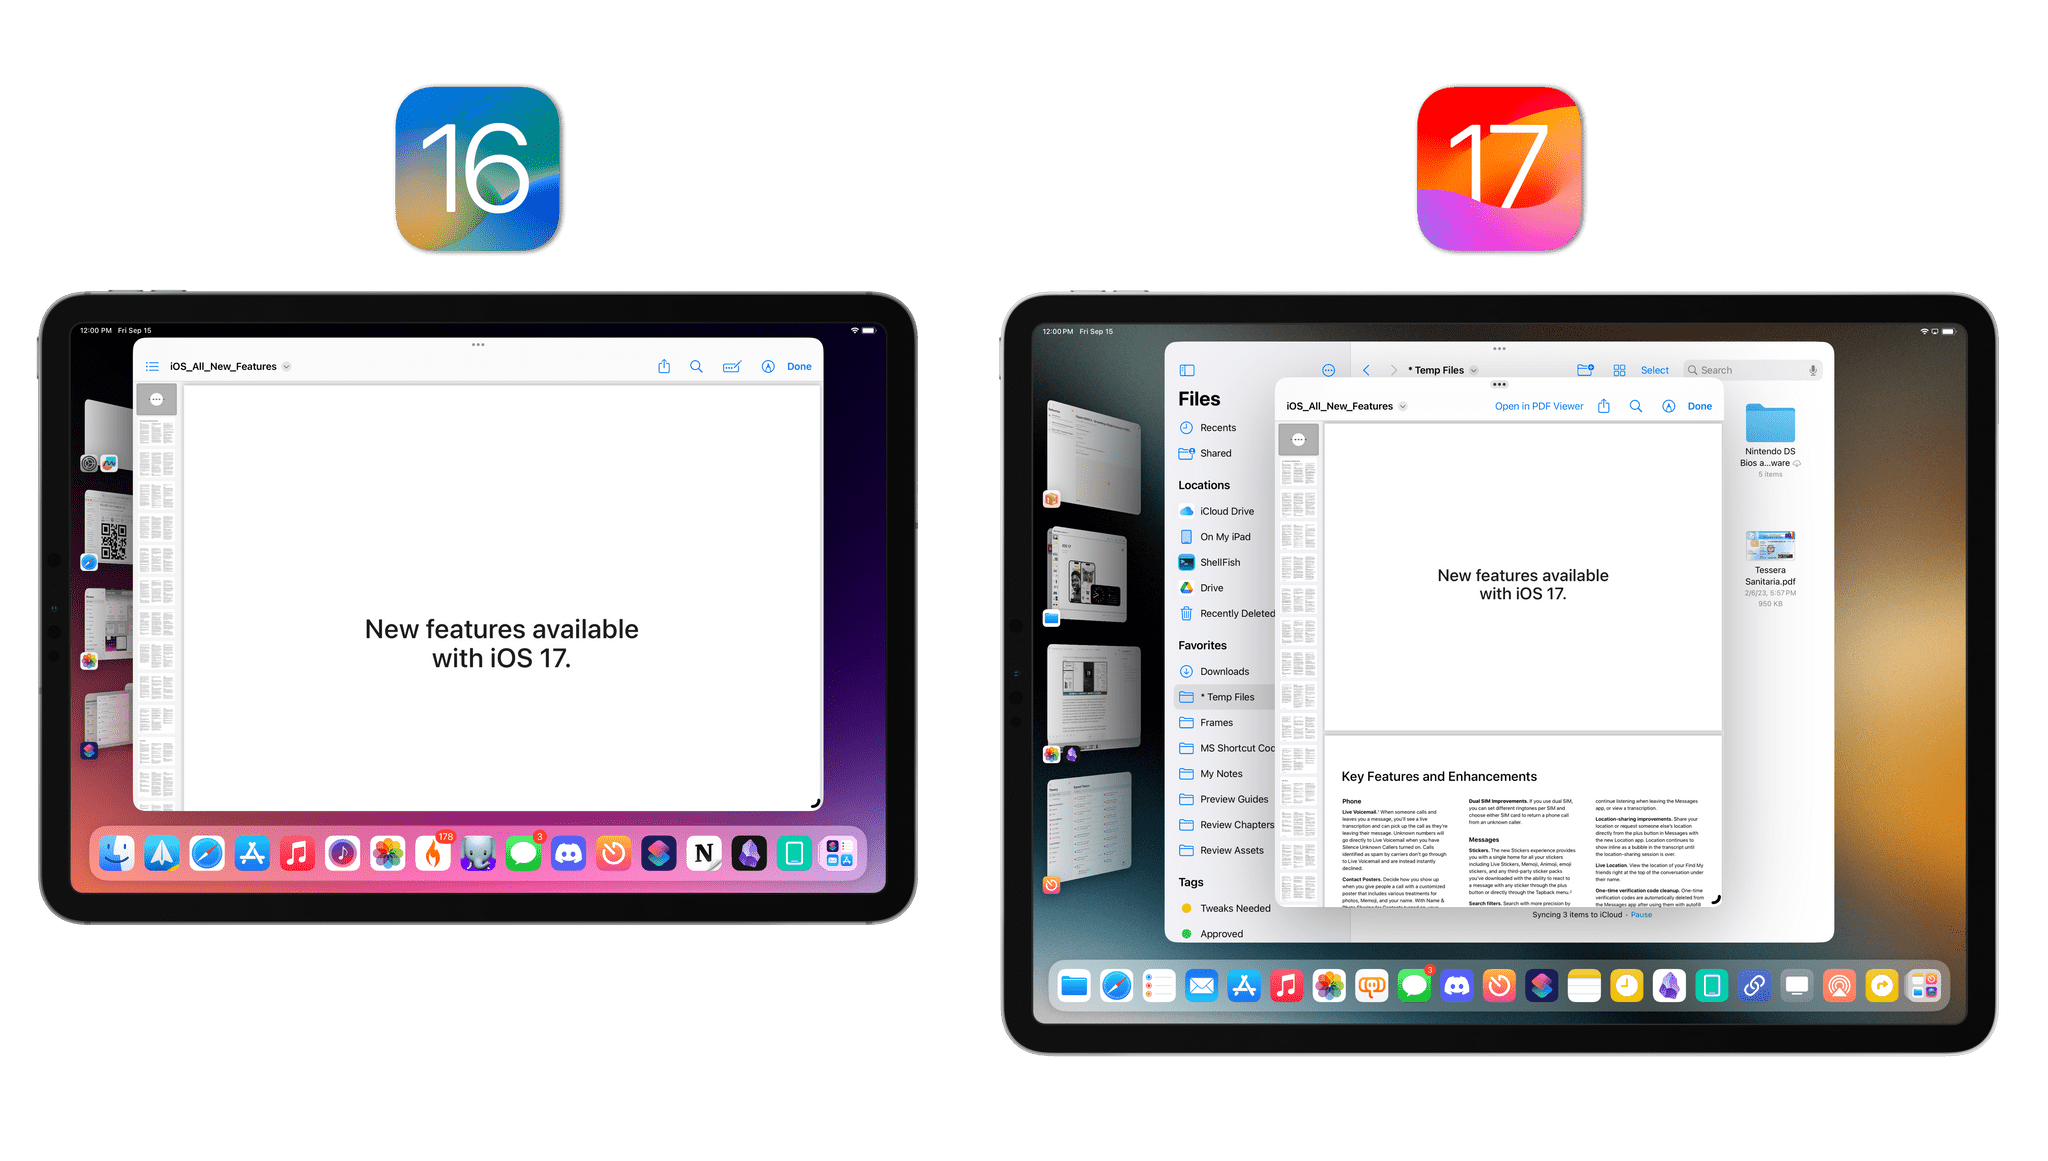 Before iPadOS 17, document previews in Files would always open in full-screen in the current window. Now, they open as new windows by default.